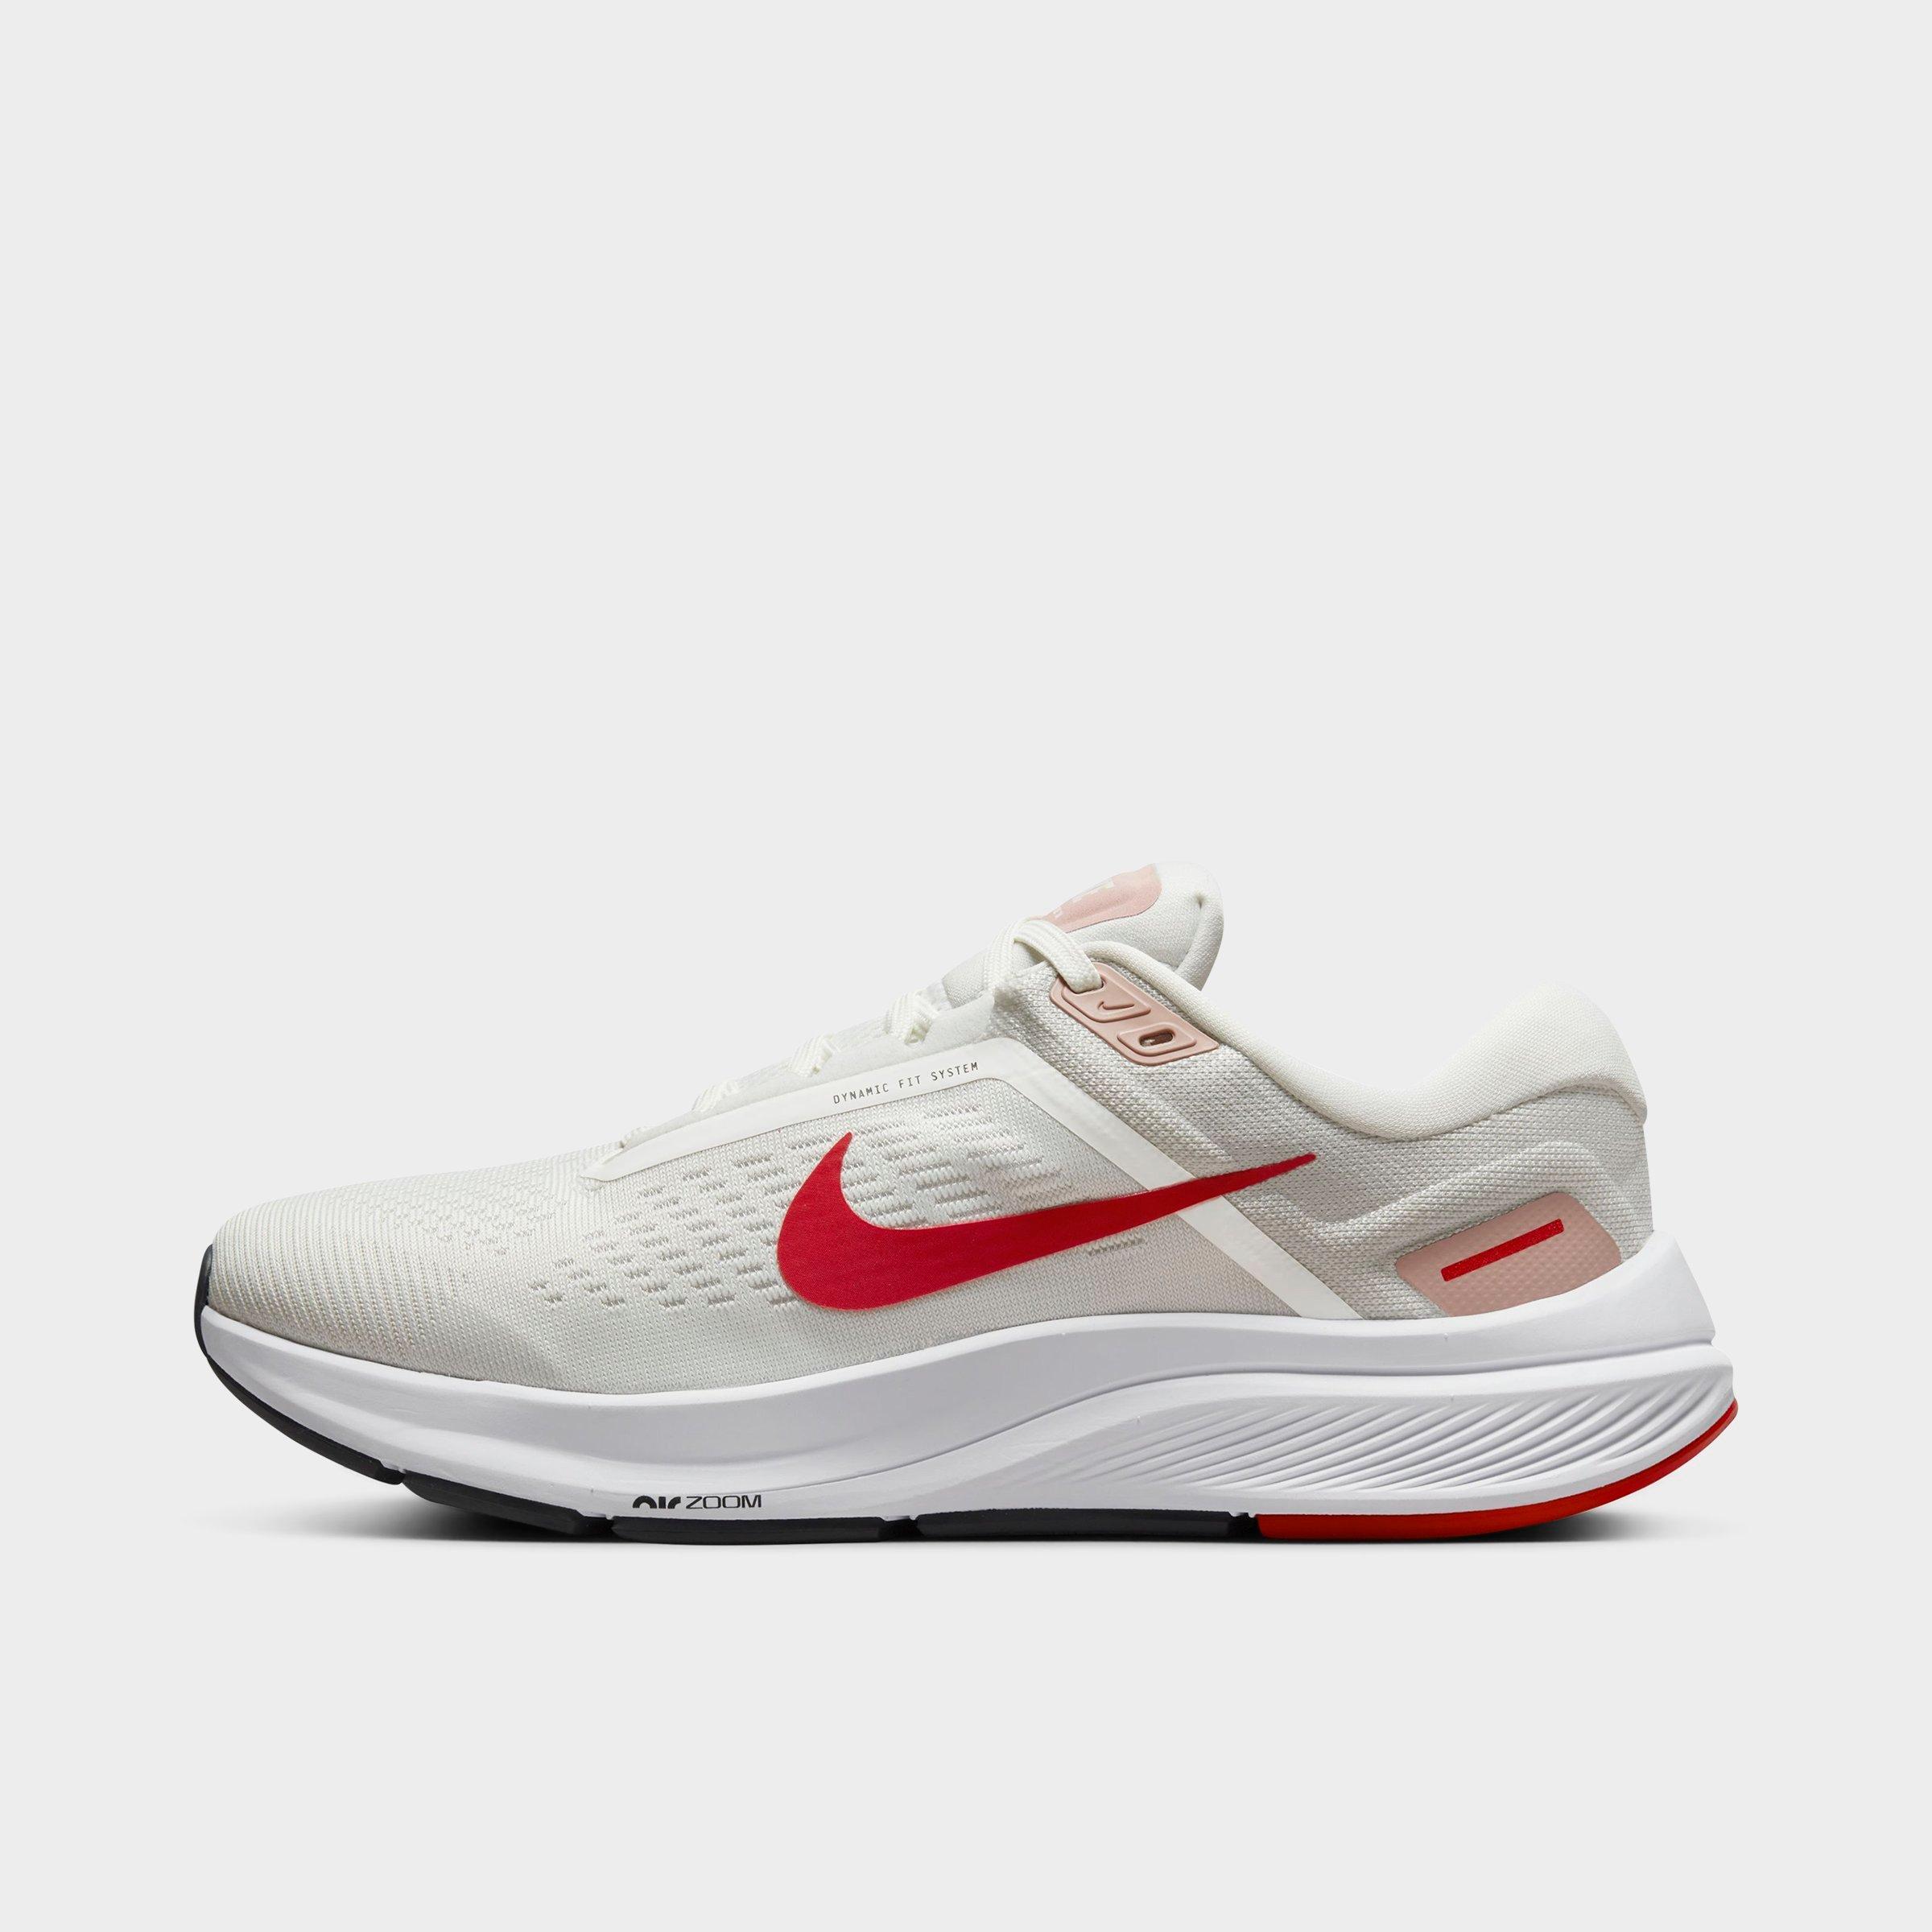 Nike Women's Structure 24 Running Shoes In Summit White/university Red/photon Dust/pink Oxford/white/off Noir